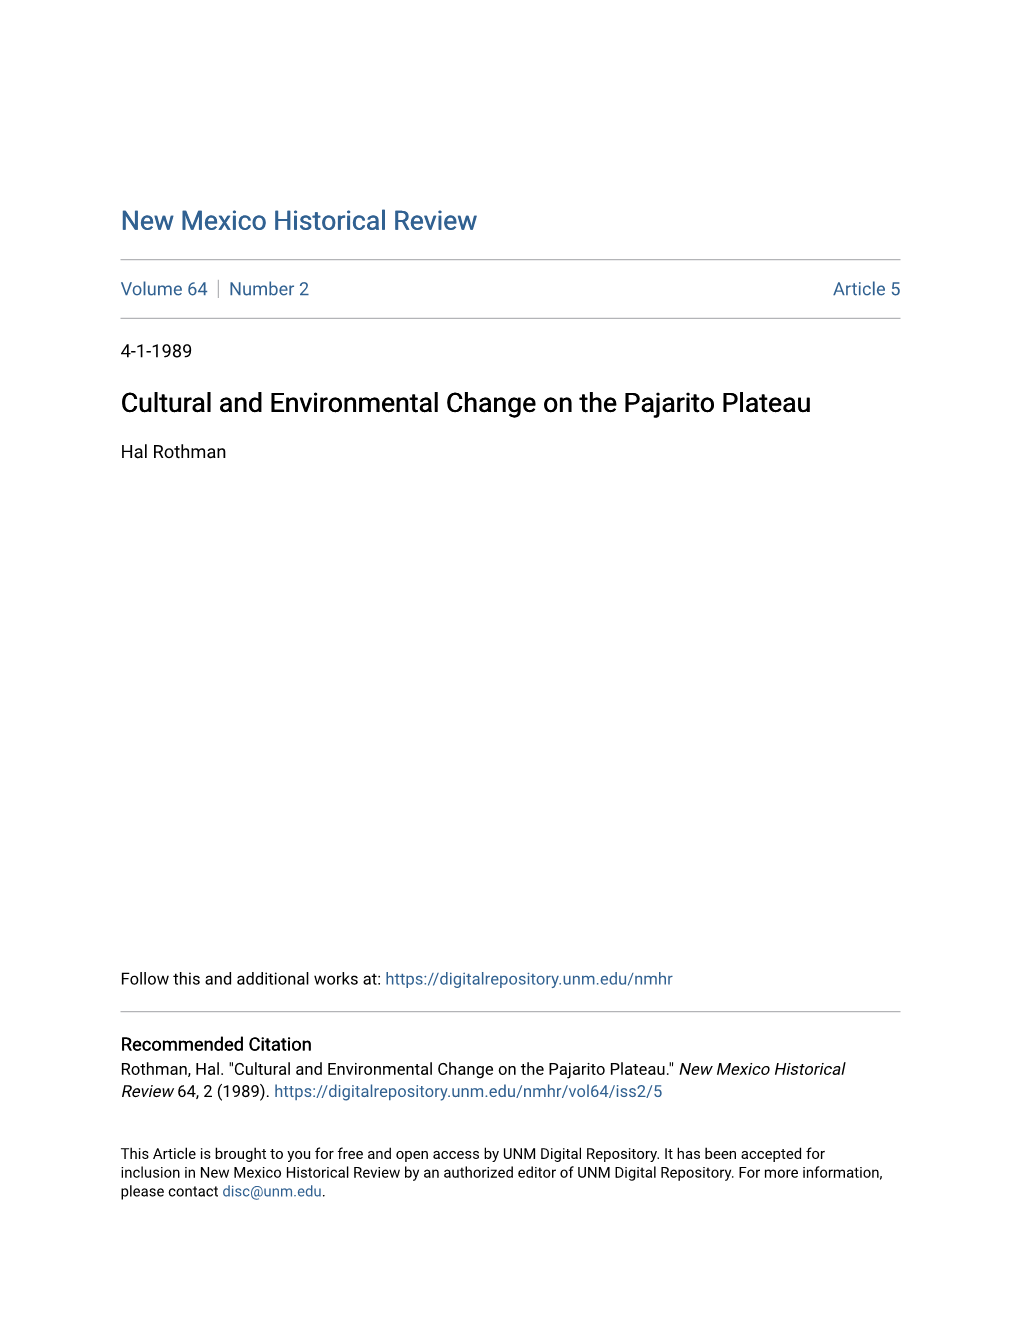 Cultural and Environmental Change on the Pajarito Plateau